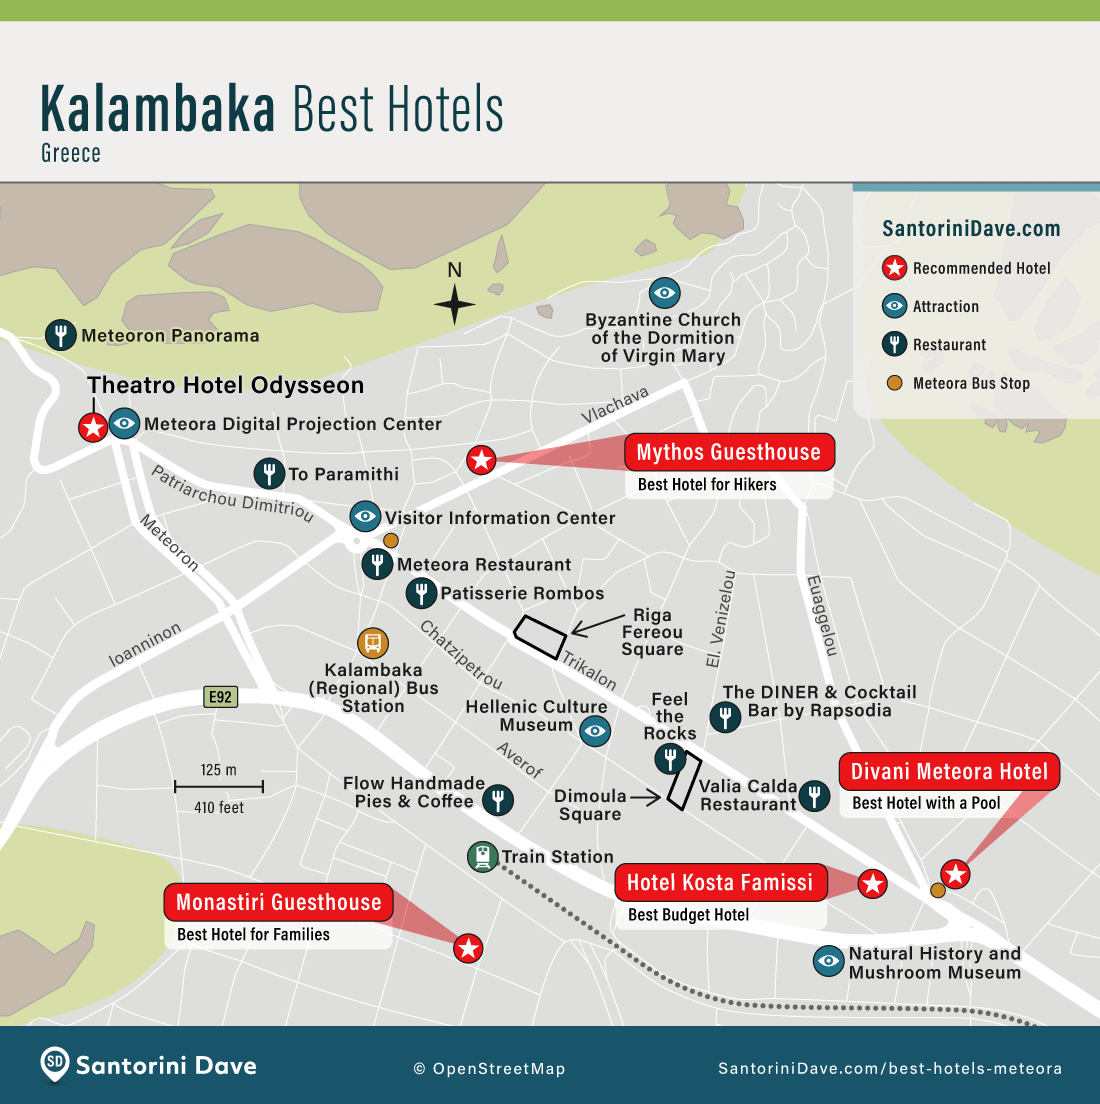 Map showing the locations of the best hotels, restaurants, and attractions in Kalambaka, Greece